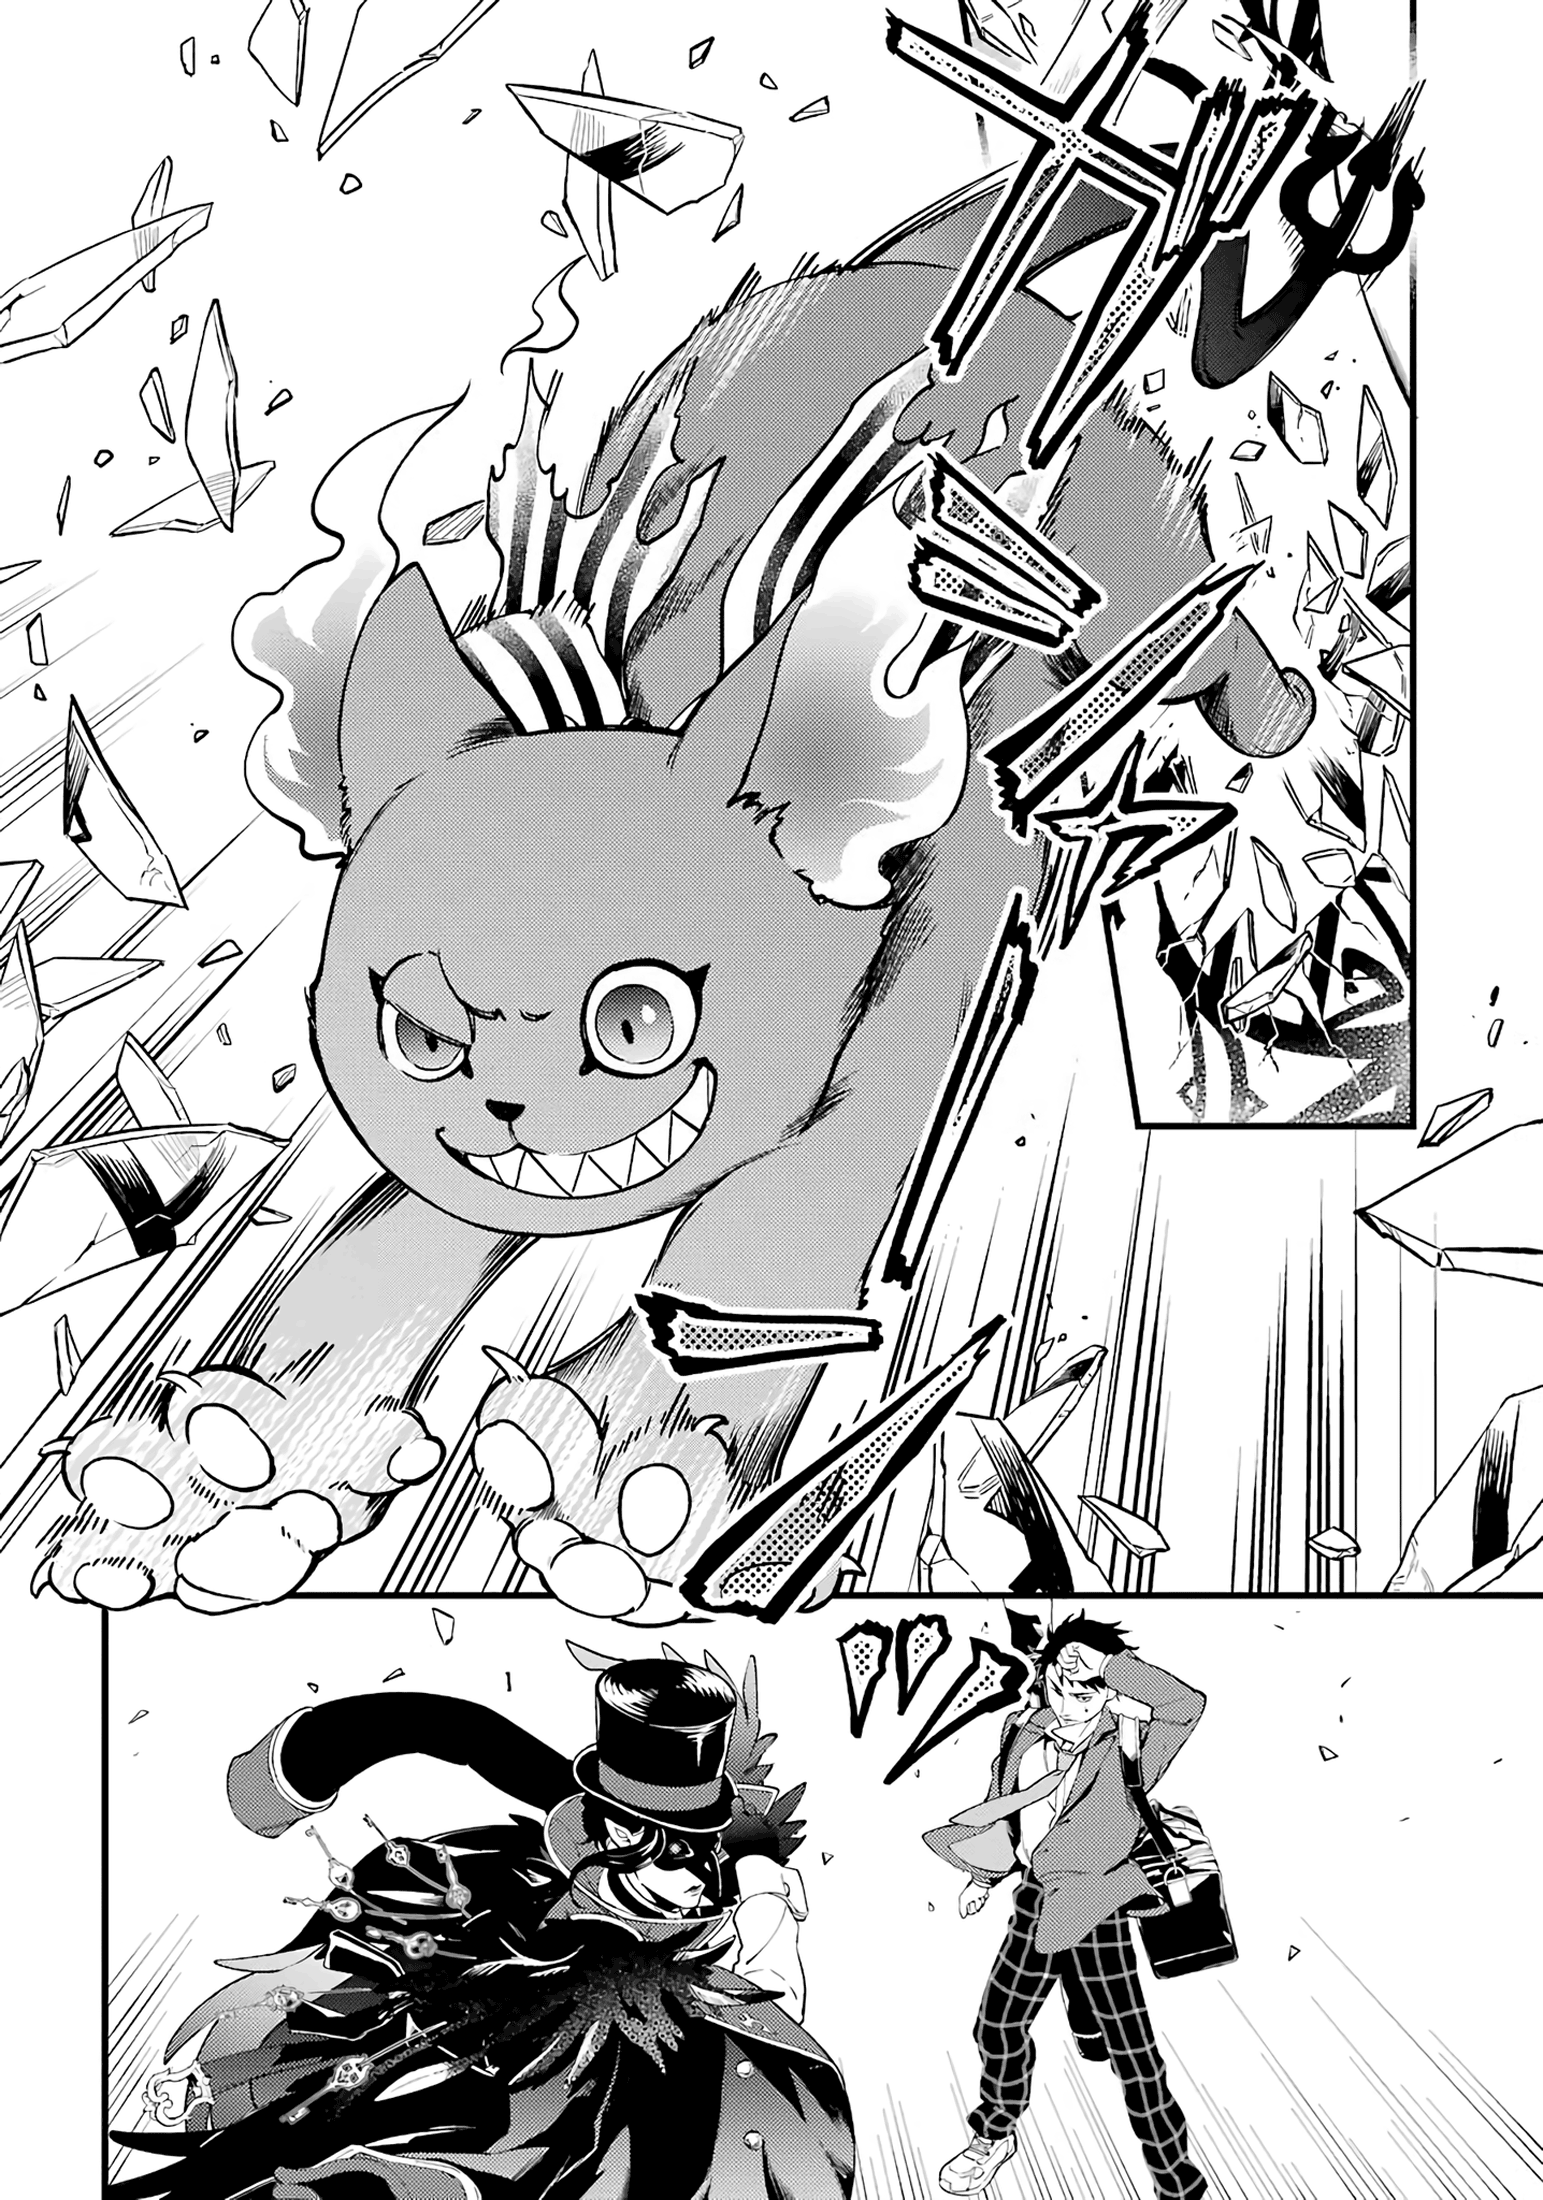 Disney Twisted Wonderland - The Comic - chapter 1 - page 31